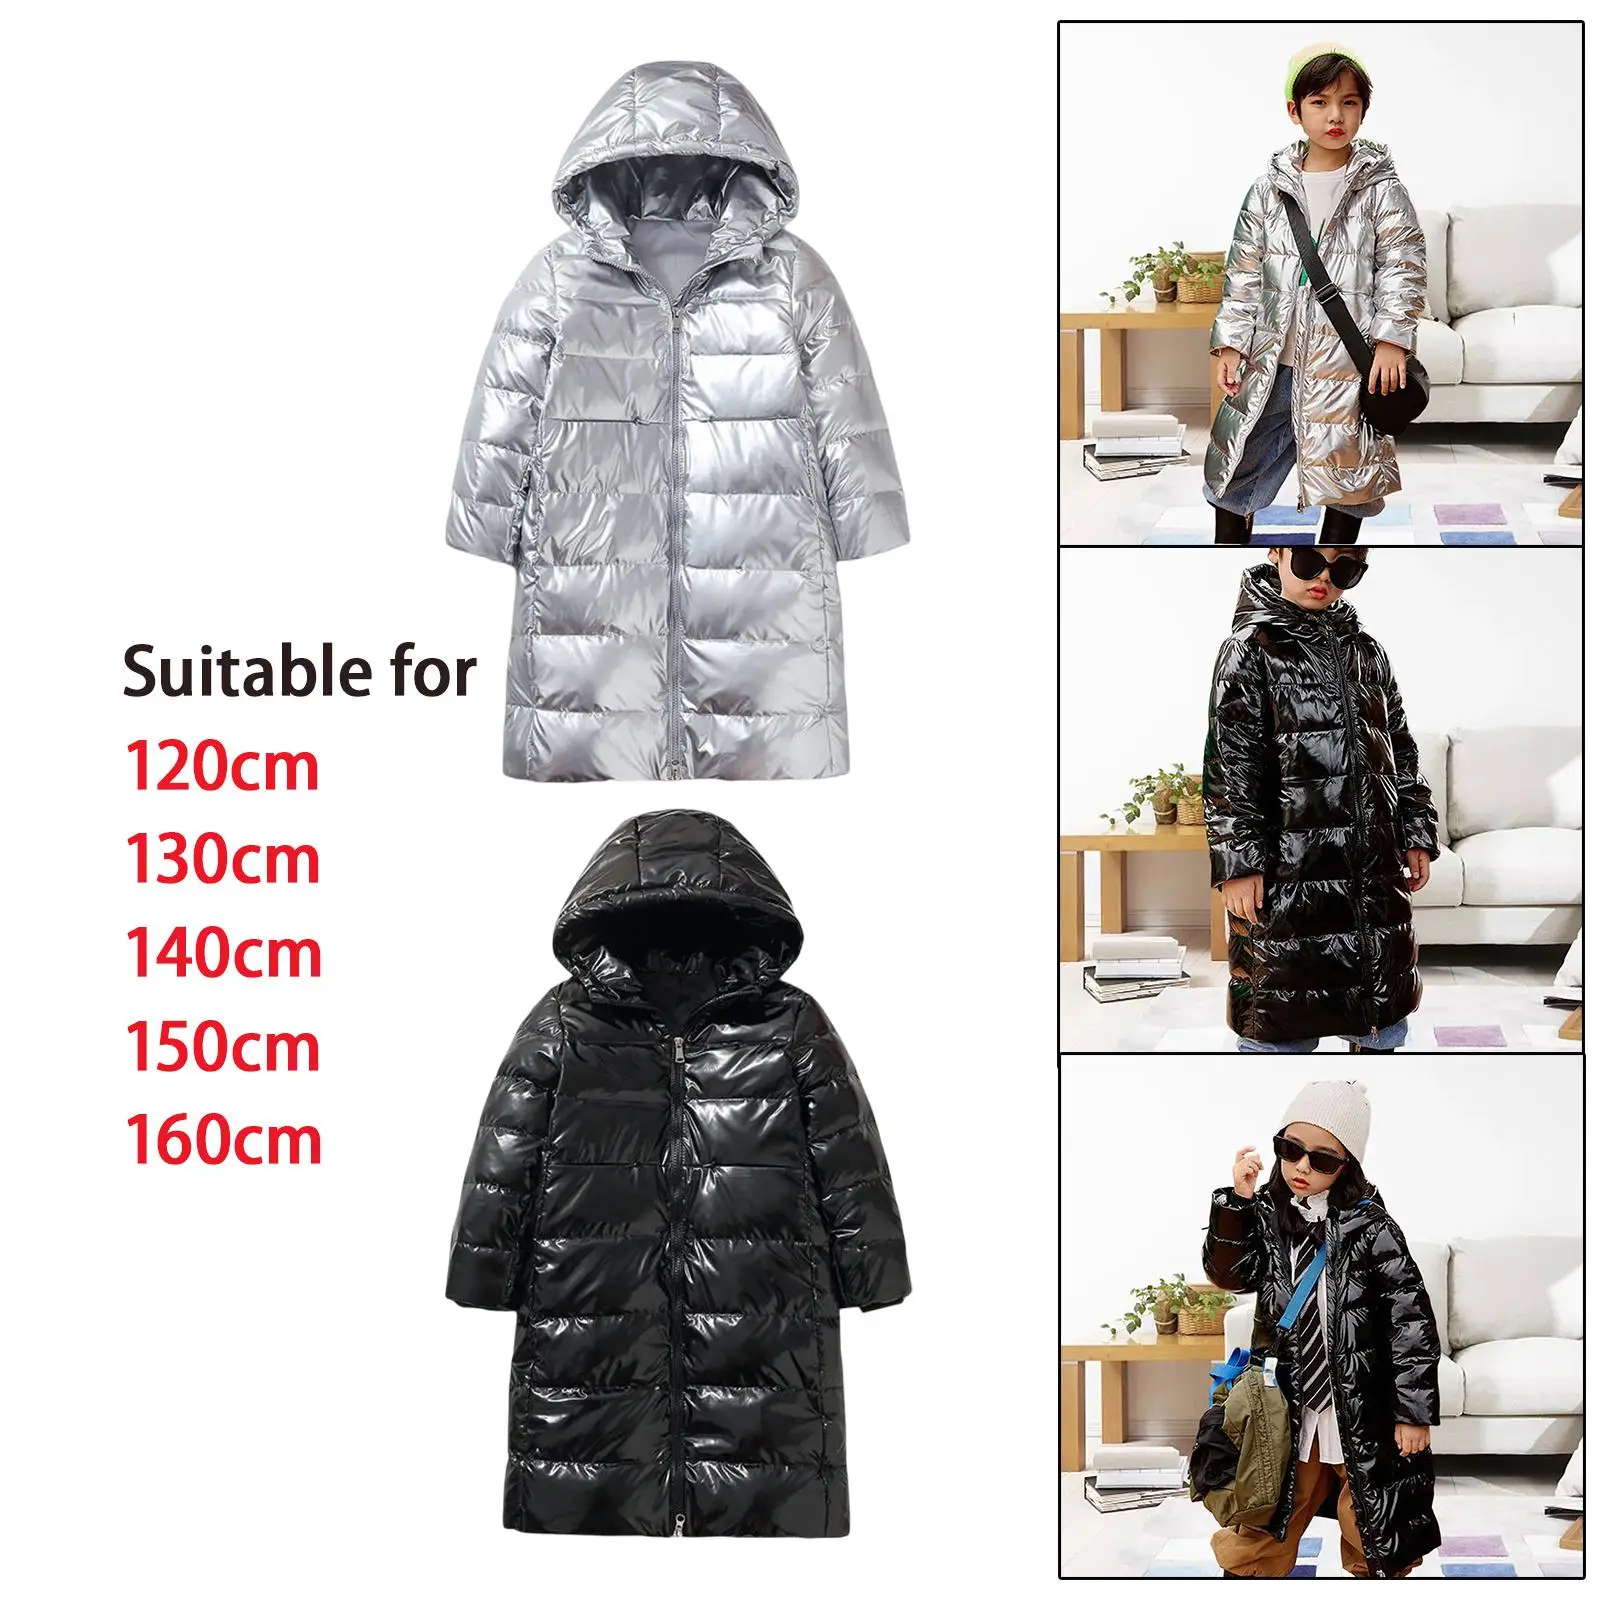 Children Long Jacket Over The knee to coat Lightweight Convenience Thick Down Thicken Puffer Jacket for Kids Winter